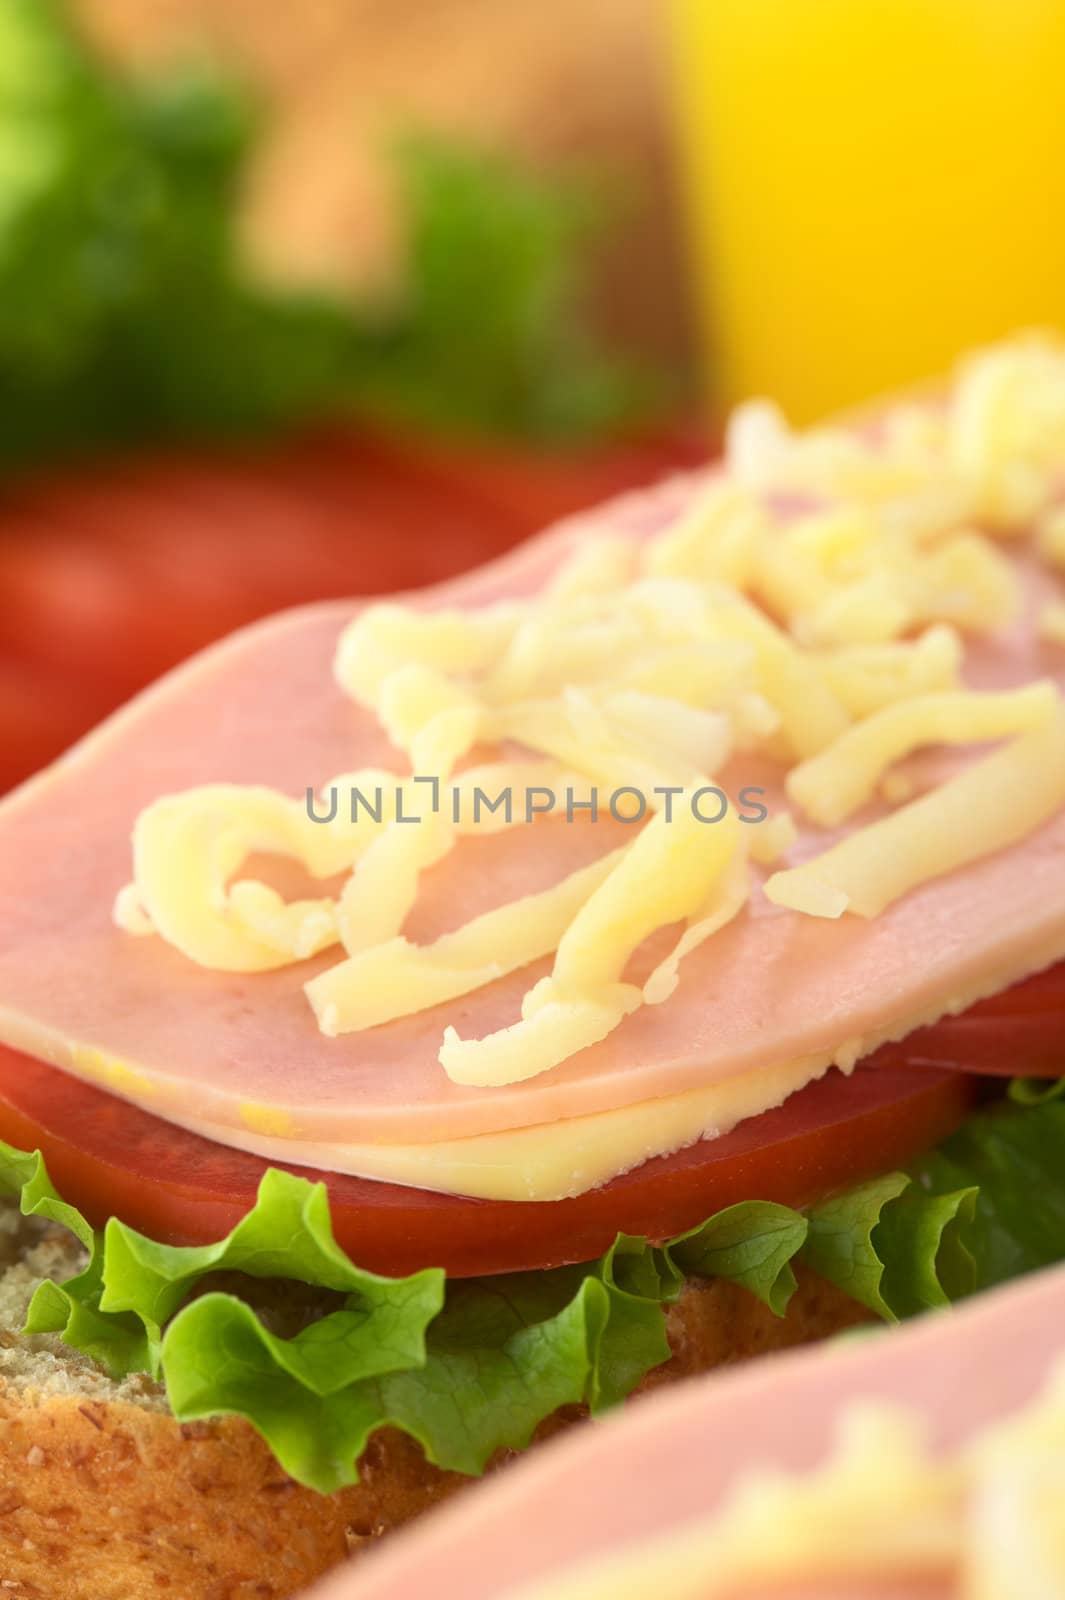 Open Sandwich with Grated Cheese by ildi